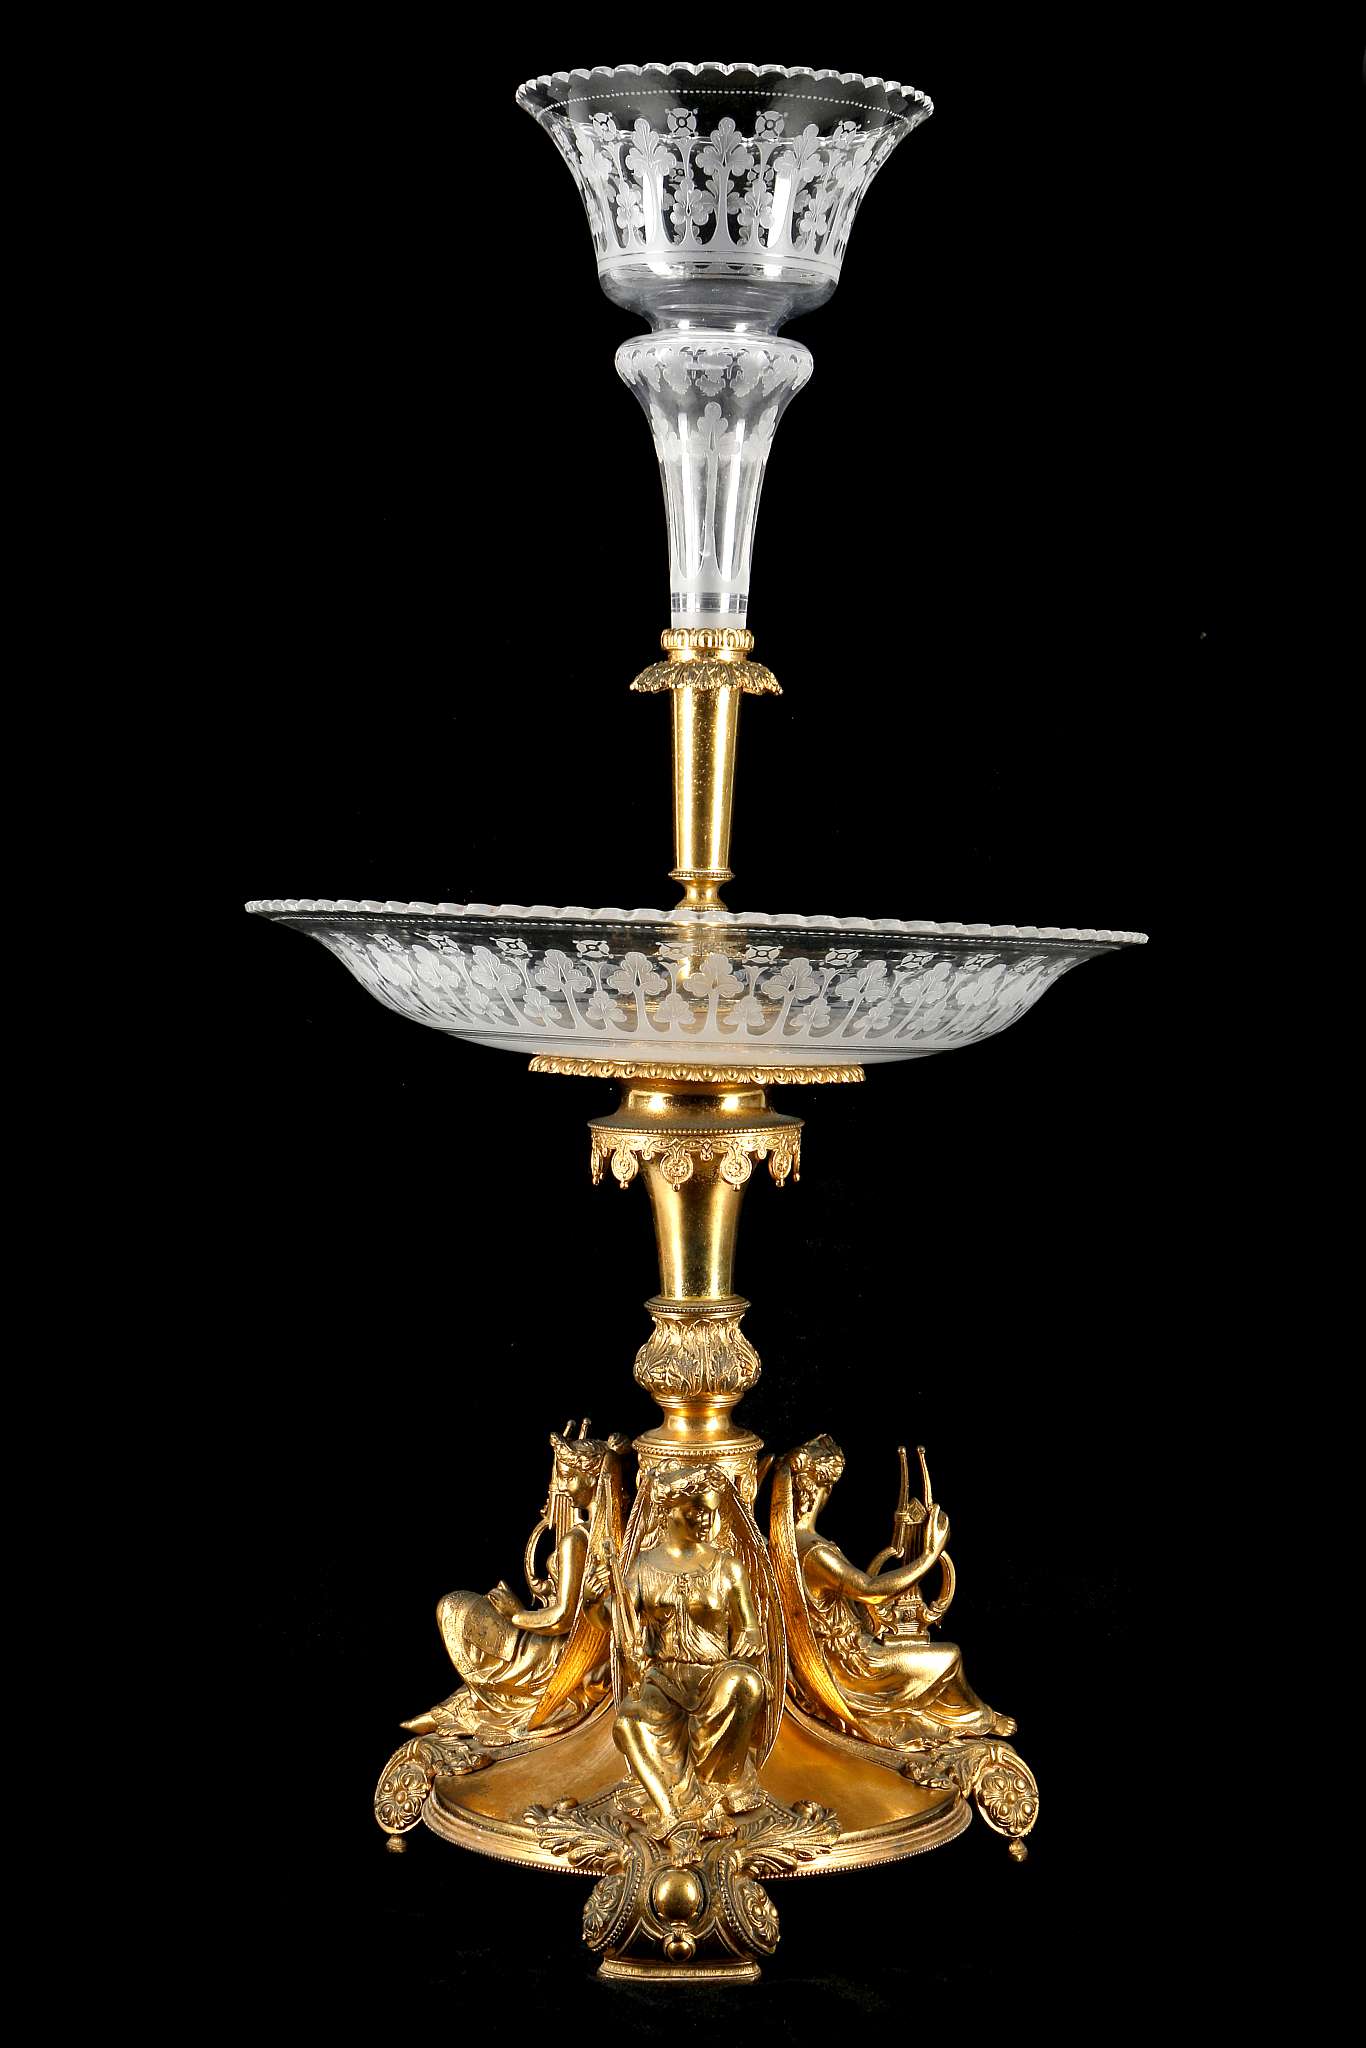 A VERY FINE GILT BRONZE AND ETCHED GLASS TABLE CENTREPIECE, late 19th century, by Horace